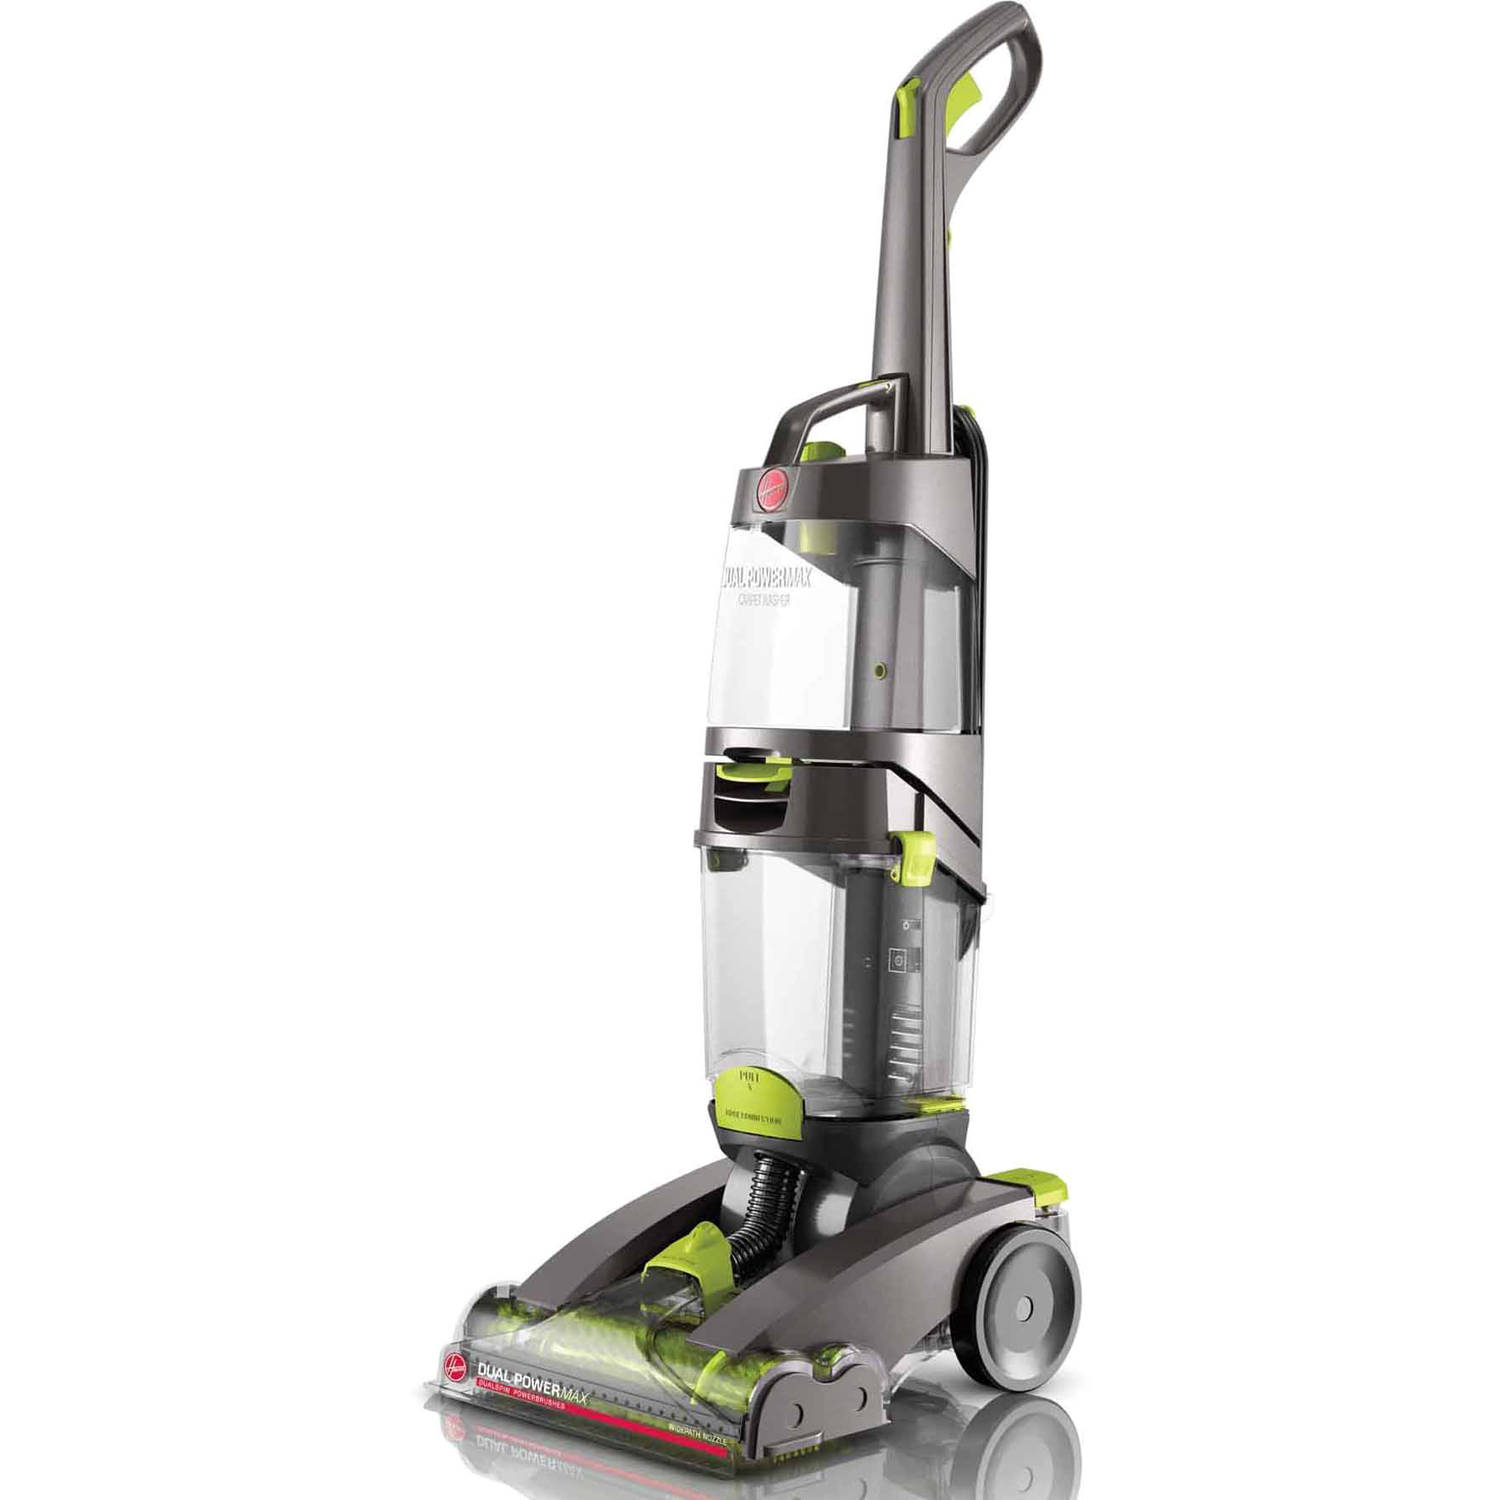 Hoover Dual Power Max Pet Carpet Cleaner w/ Antimicrobial Brushes, FH51001 - image 2 of 10